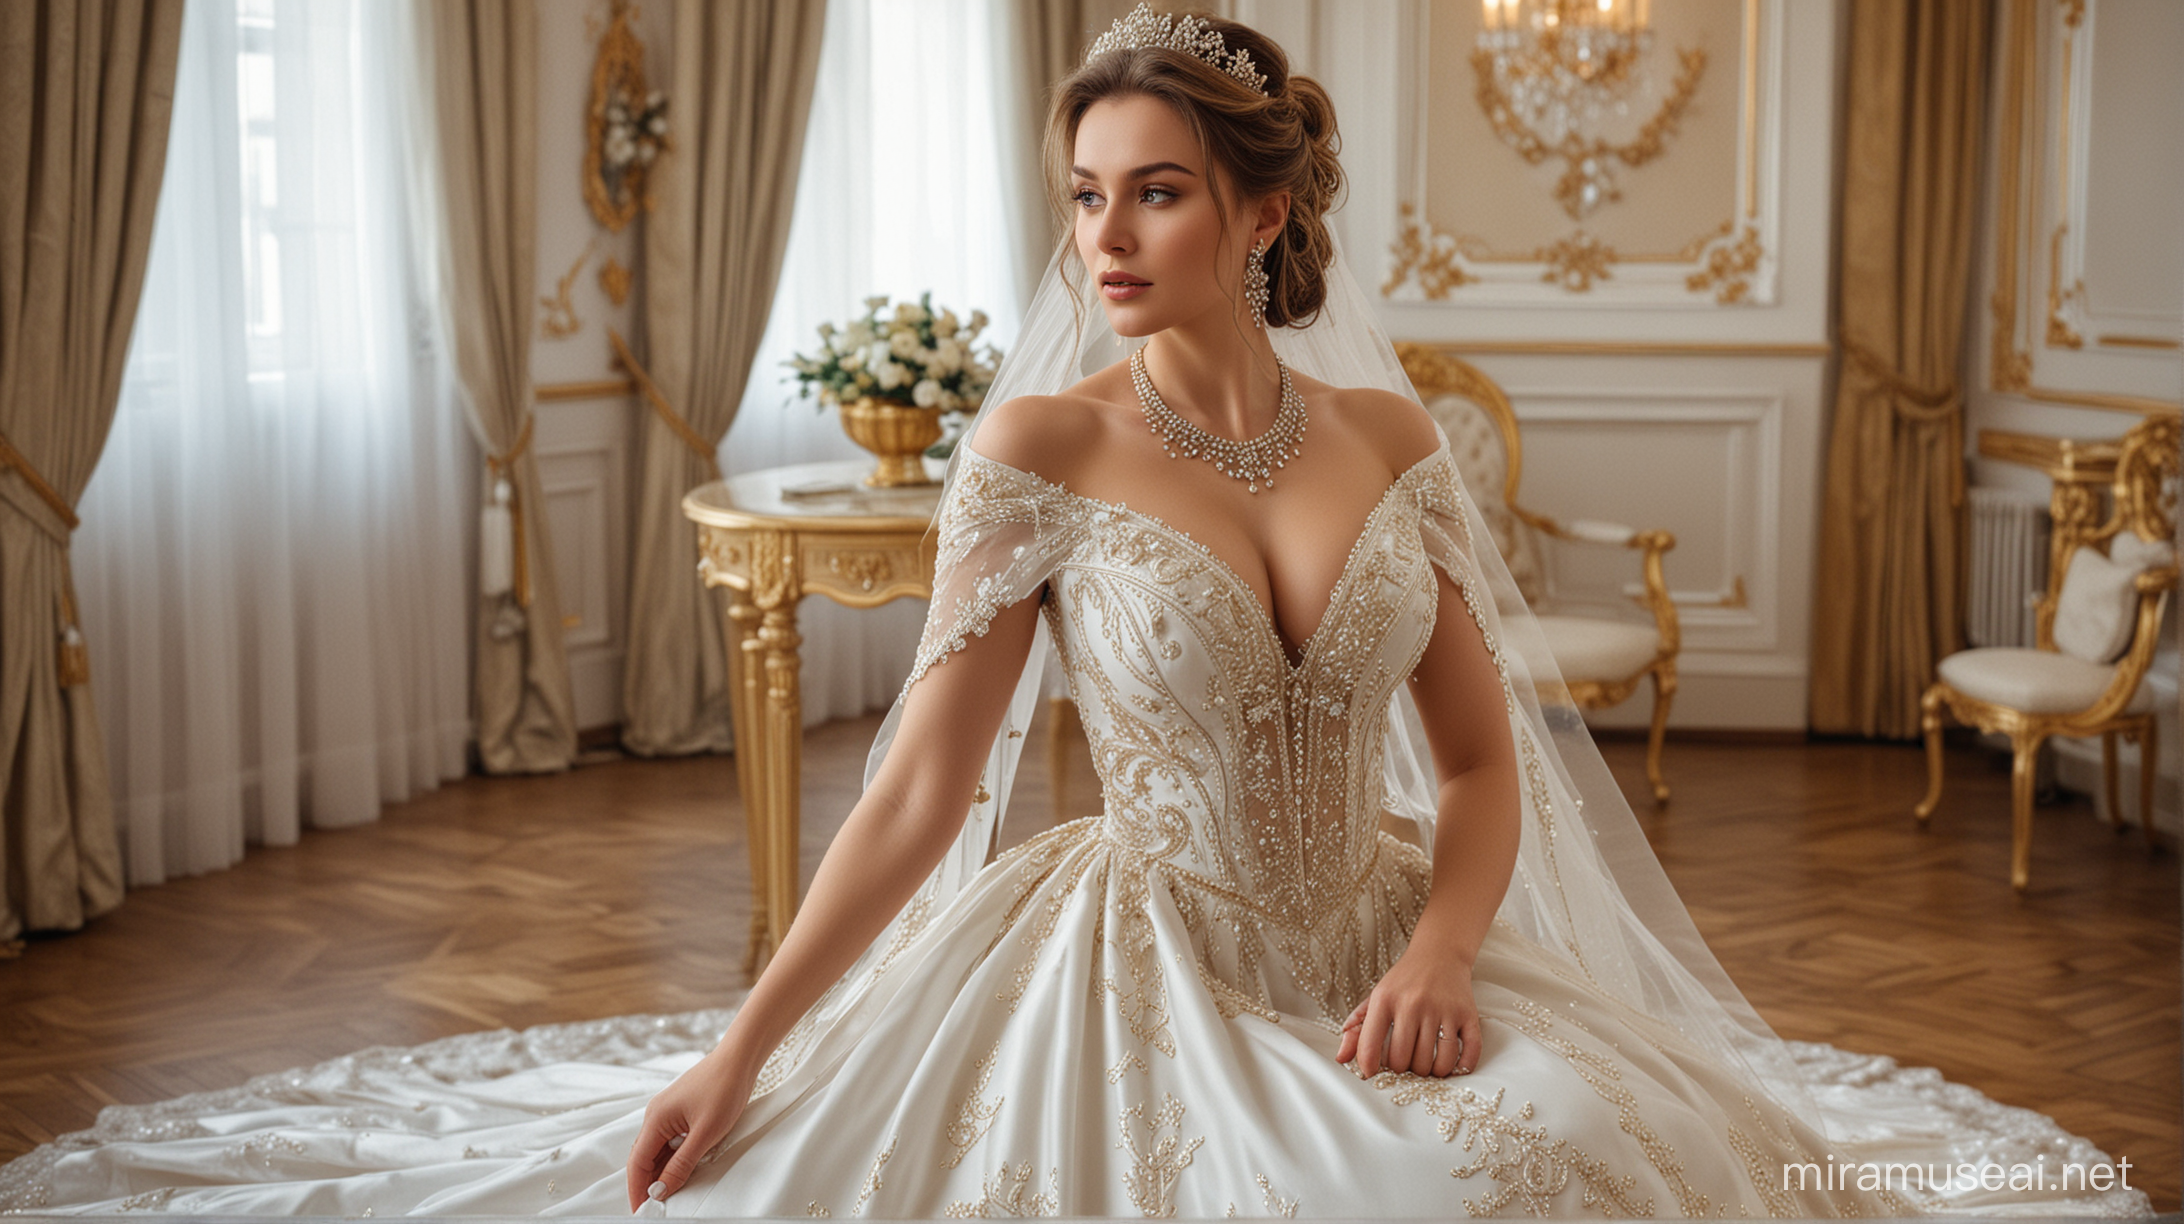 admiring the beauty of this masterpiece, a stunning ukraine woman with big breast and white and golden wedding dress with jewellery.
